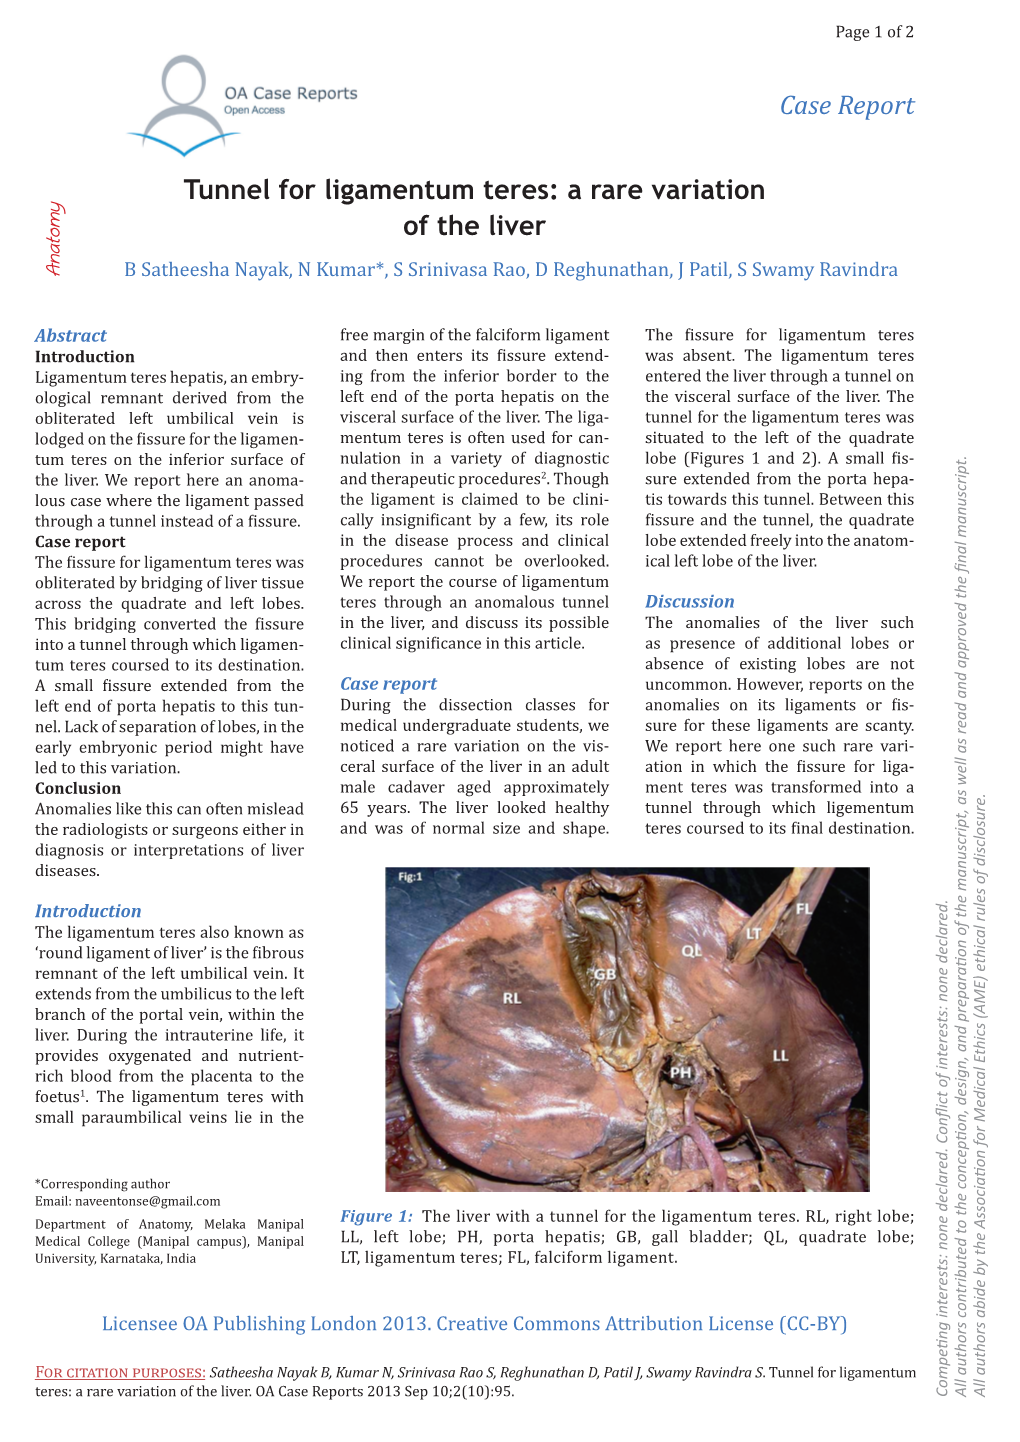 Tunnel for Ligamentum Teres: a Rare Variation of the Liver